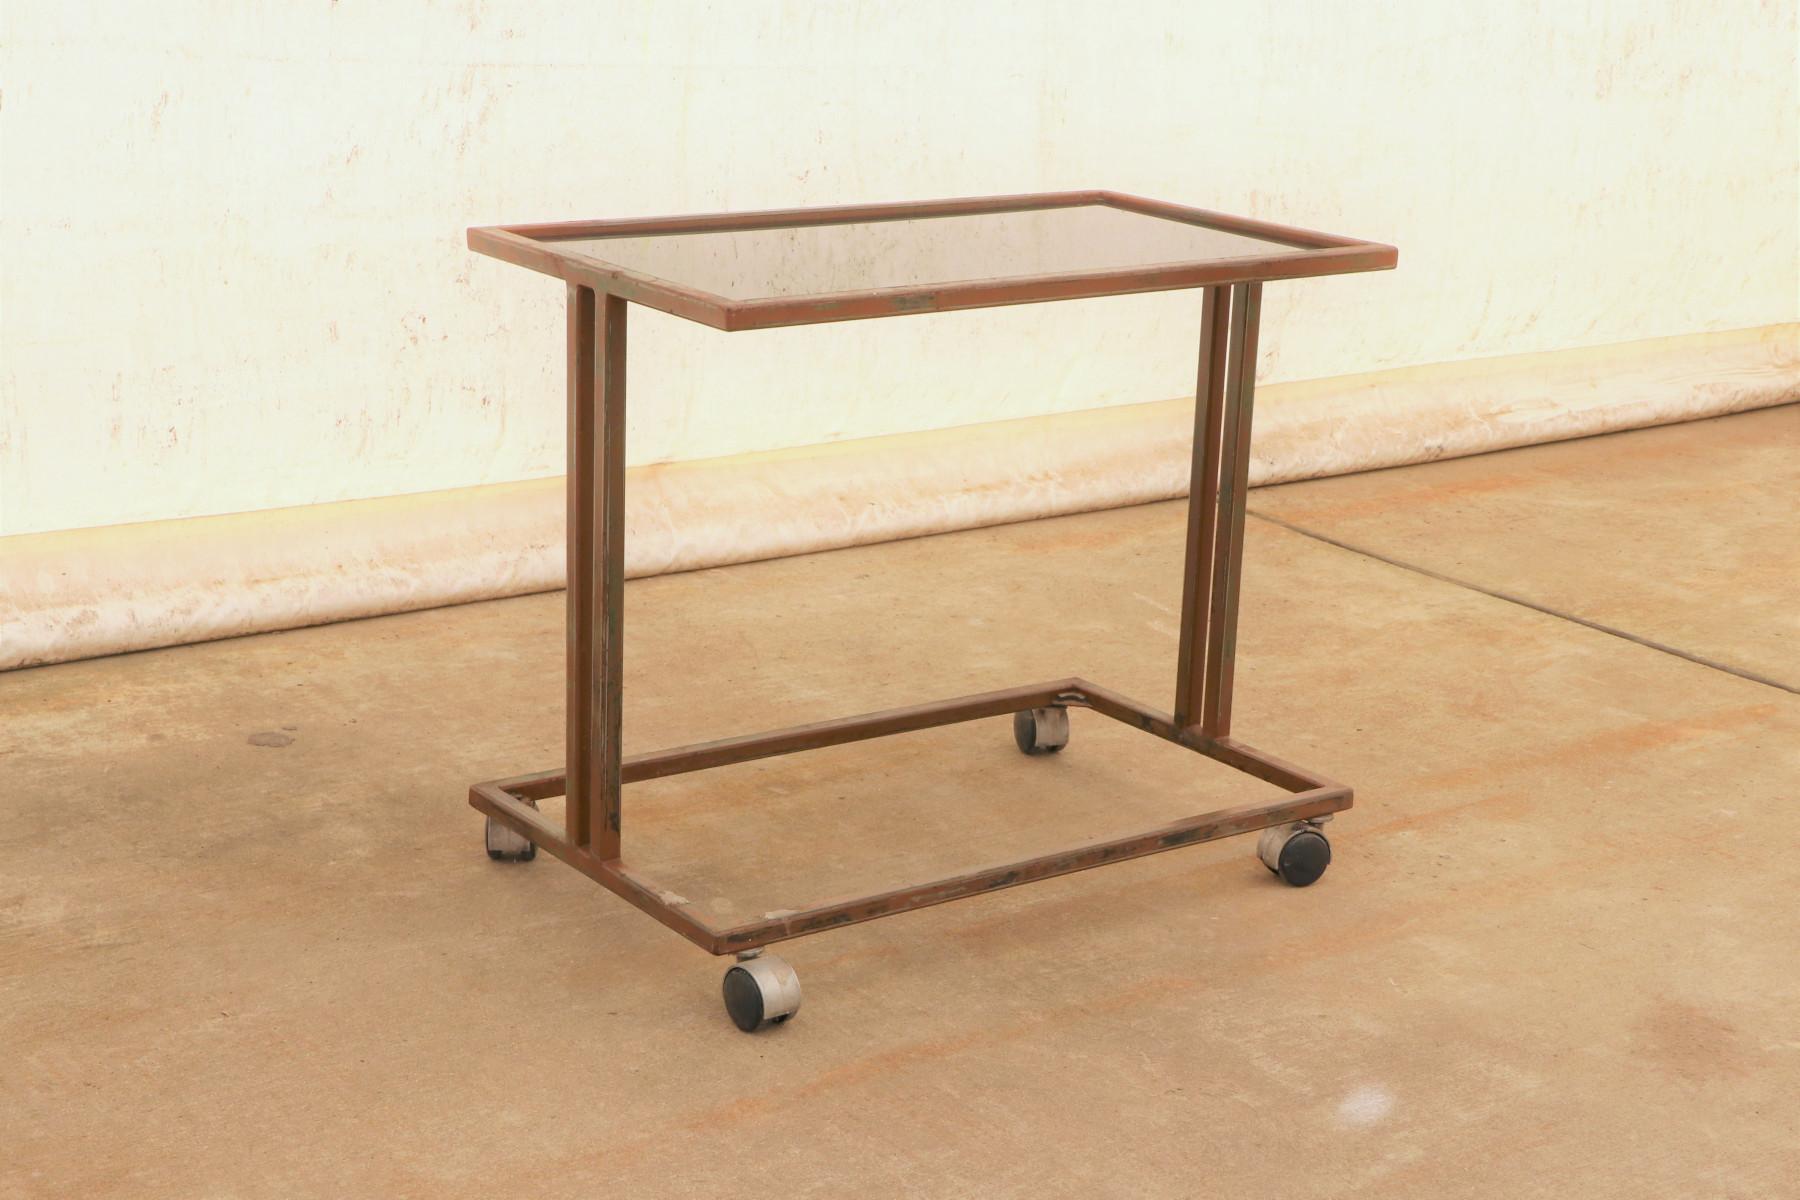 This Industrial-style serving trolley on wheels was made in the former Czechoslovakia in the 1970s.
It features an iron structure and a glass top. The table is in good preserved condition.
Signs of time and wear create an interesting and engaging